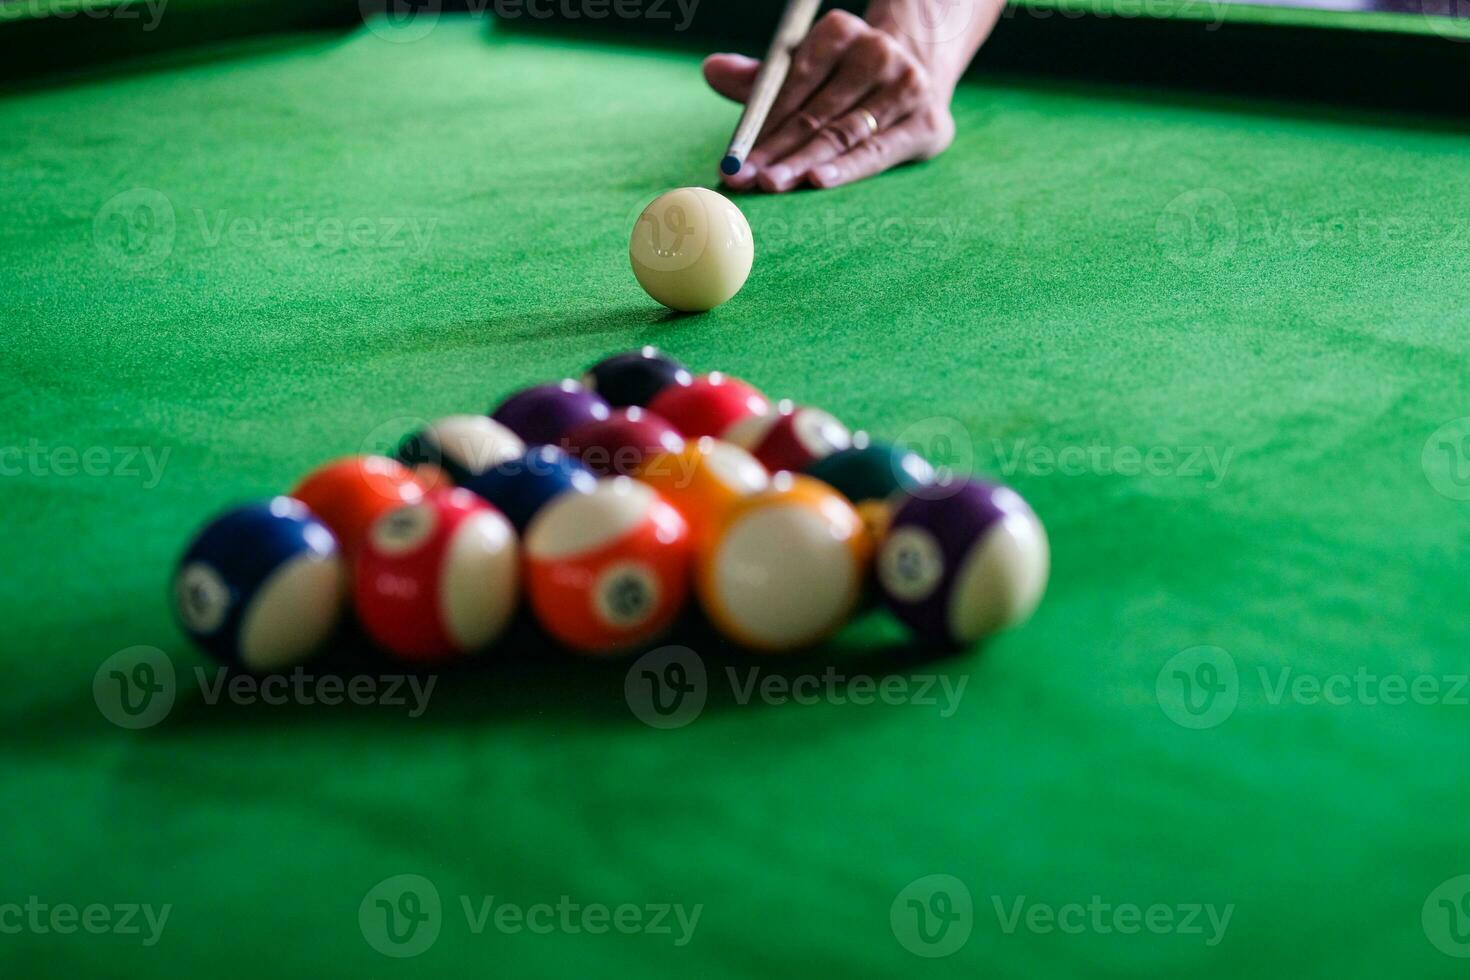 Man's hand and Cue arm playing snooker game or preparing aiming to shoot pool balls on a green billiard table. Colorful snooker balls on green frieze. photo